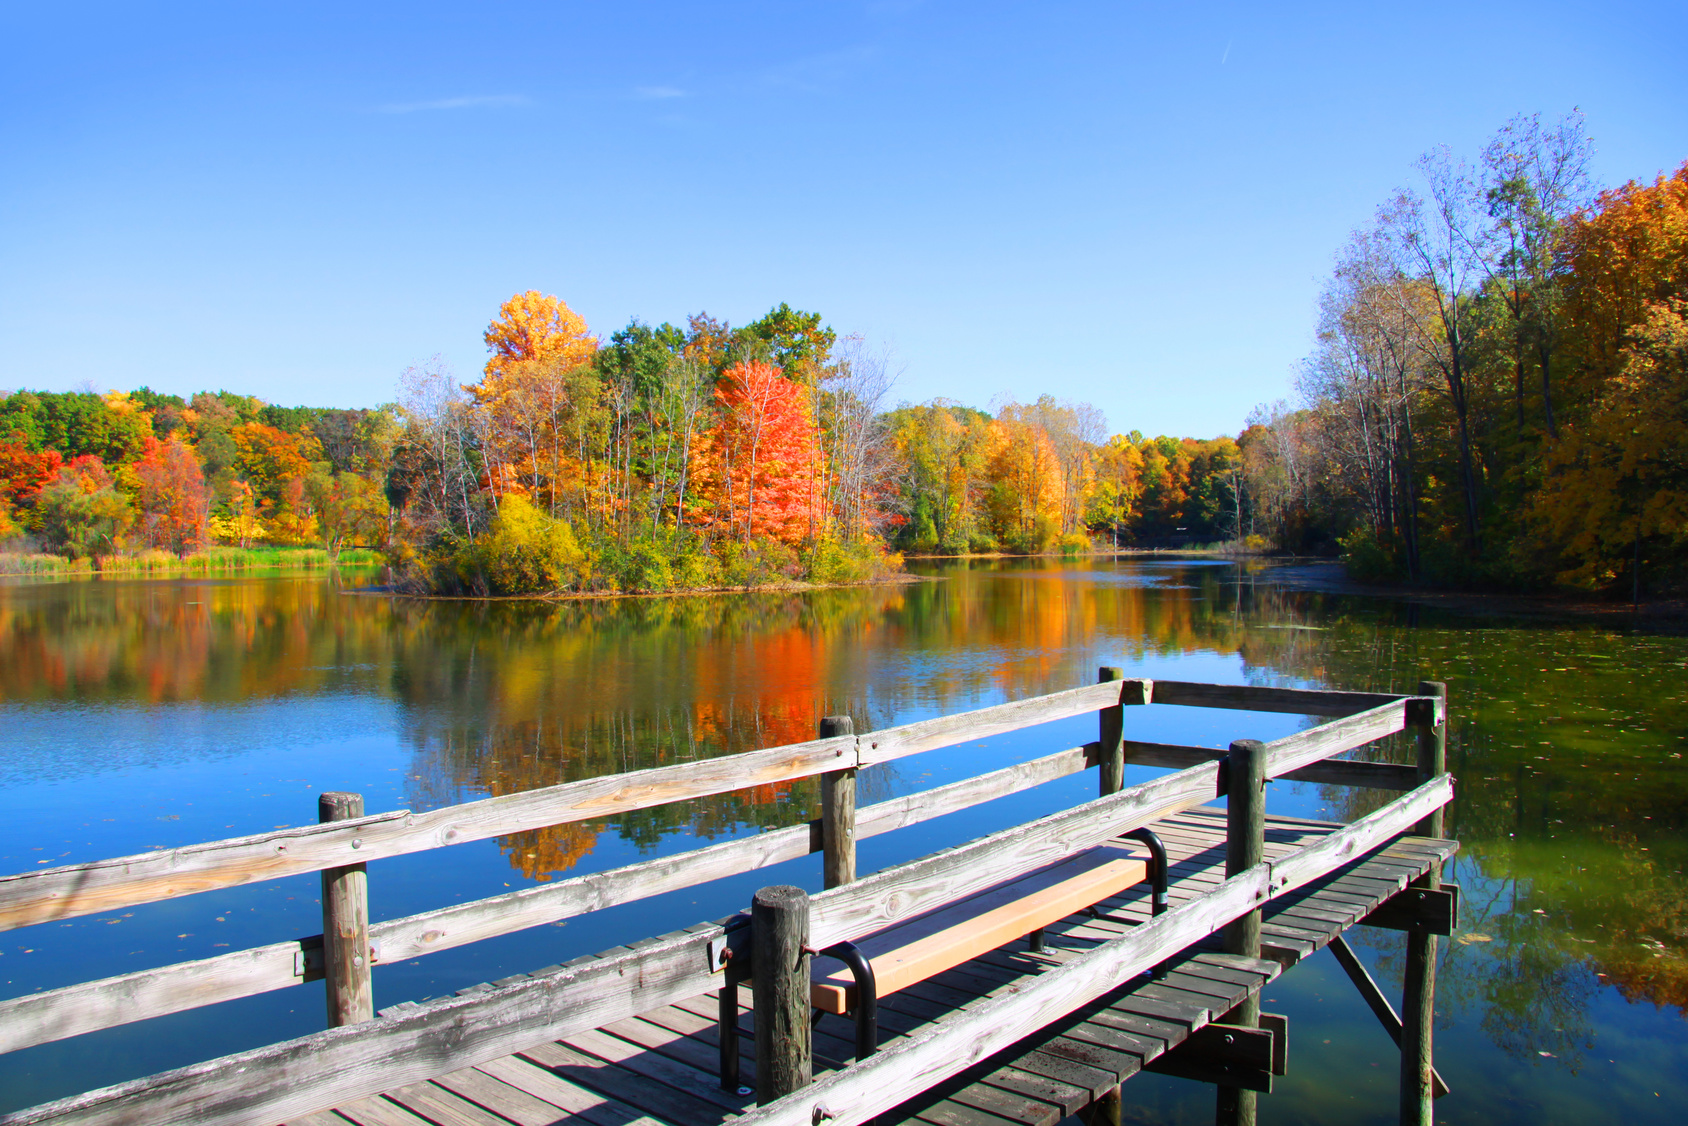 The beauty of autumn doesn't last forever, but the beauty of alkaline water certainly will!